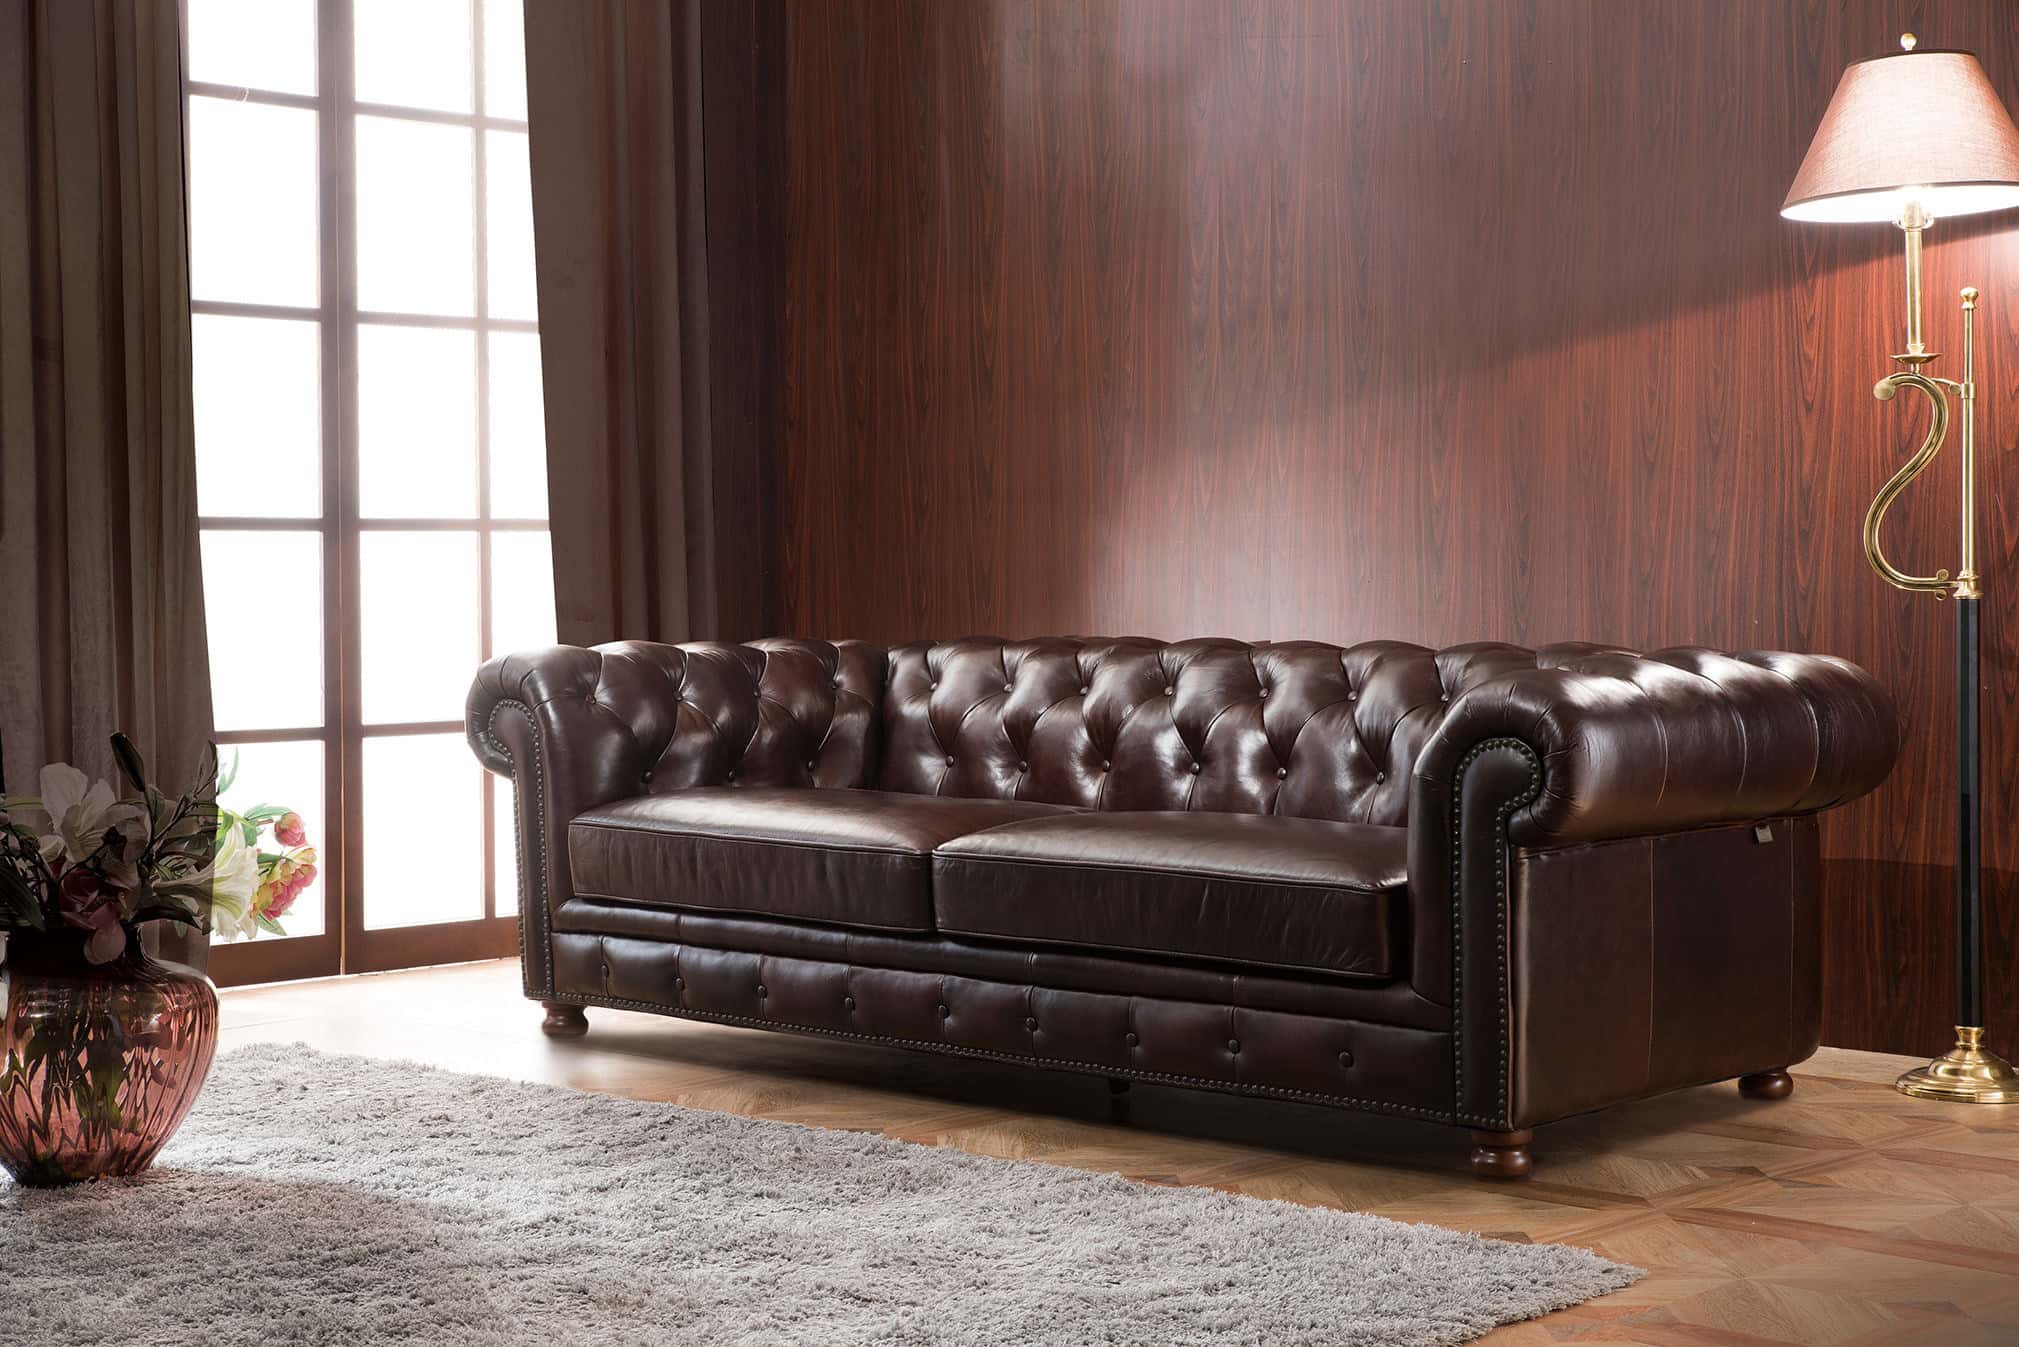 Made of top quality American calf leather European classic chesterfield style sofa 2